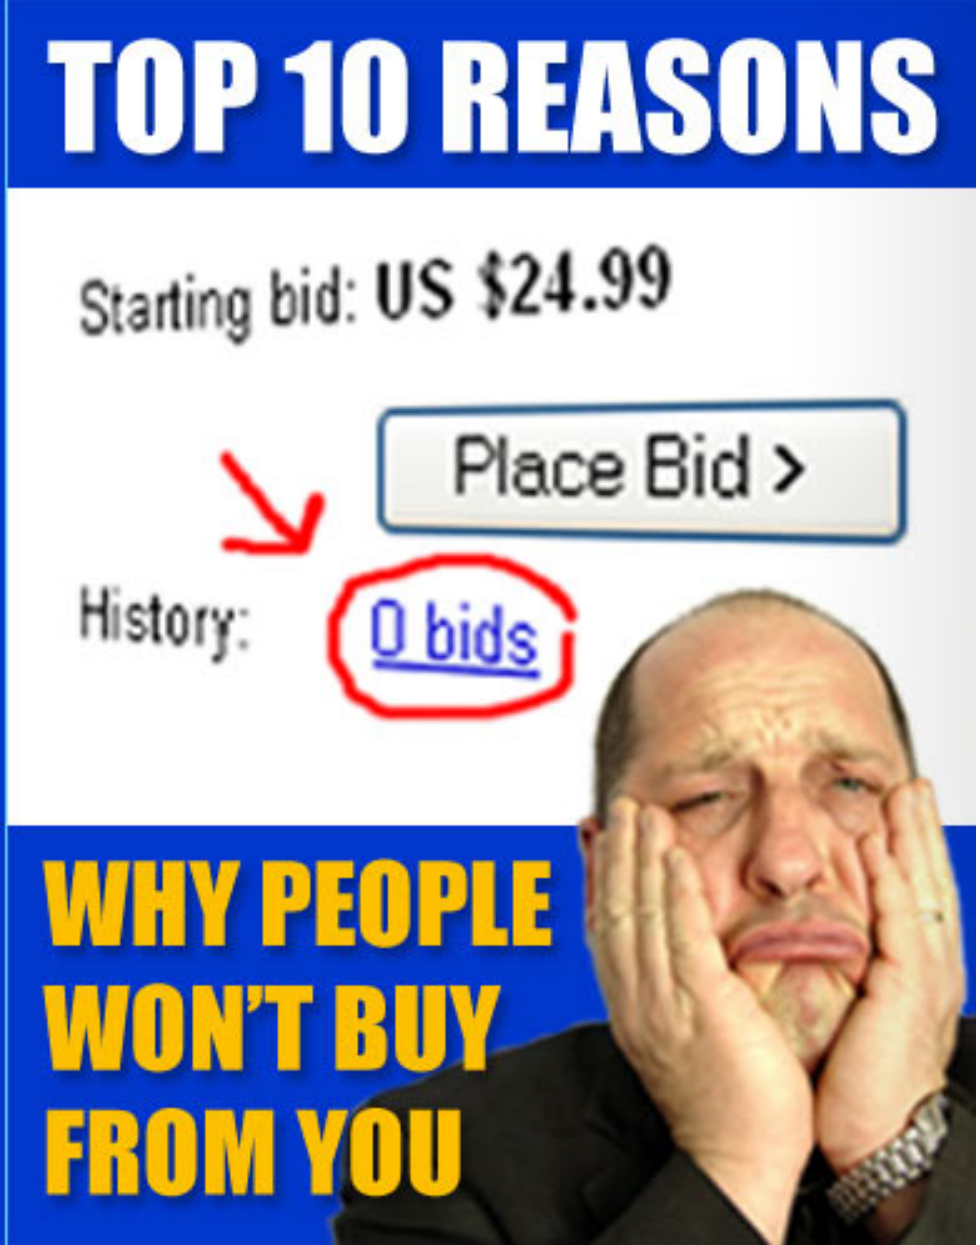 Top 10 Reasons Why People Won't Buy From You